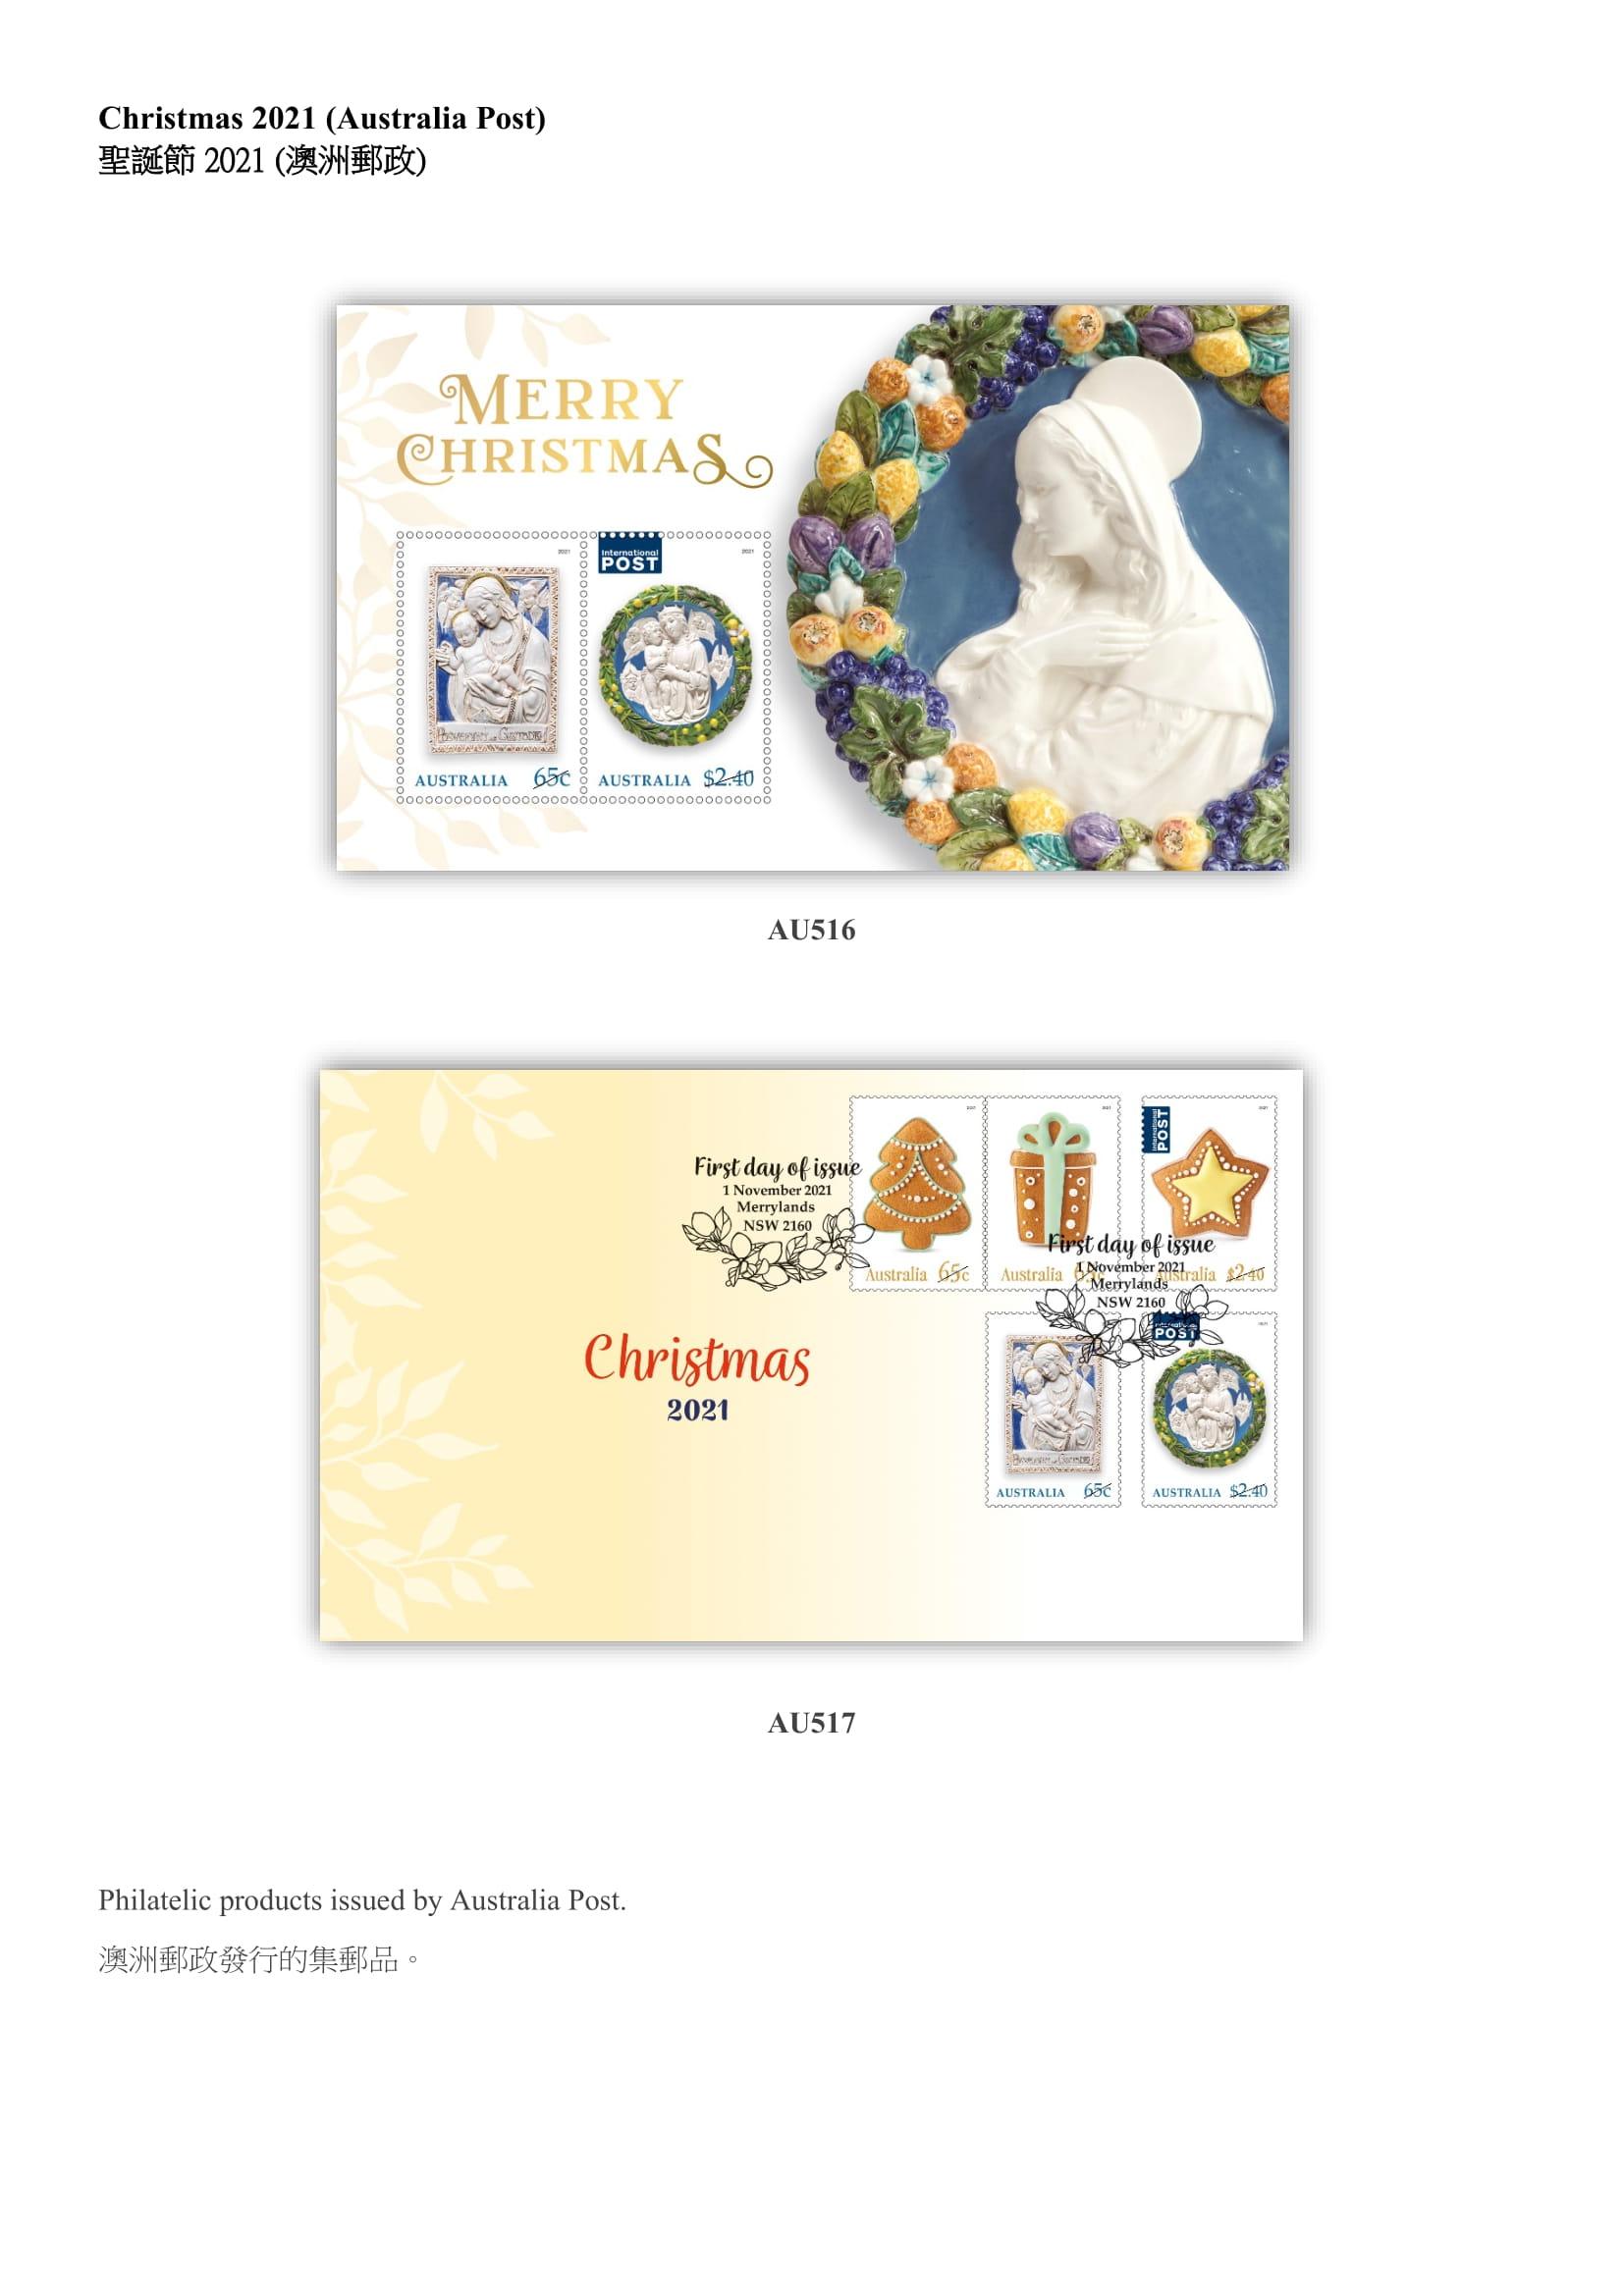 Hongkong Post announced today (December 14) that selected philatelic products issued by Macao and overseas postal administrations, including Australia, Canada, Japan, Liechtenstein and New Zealand, will be put on sale at the Hongkong Post online shopping mall ShopThruPost starting from 8am on December 16. Picture shows philatelic products issued by Australia Post.

